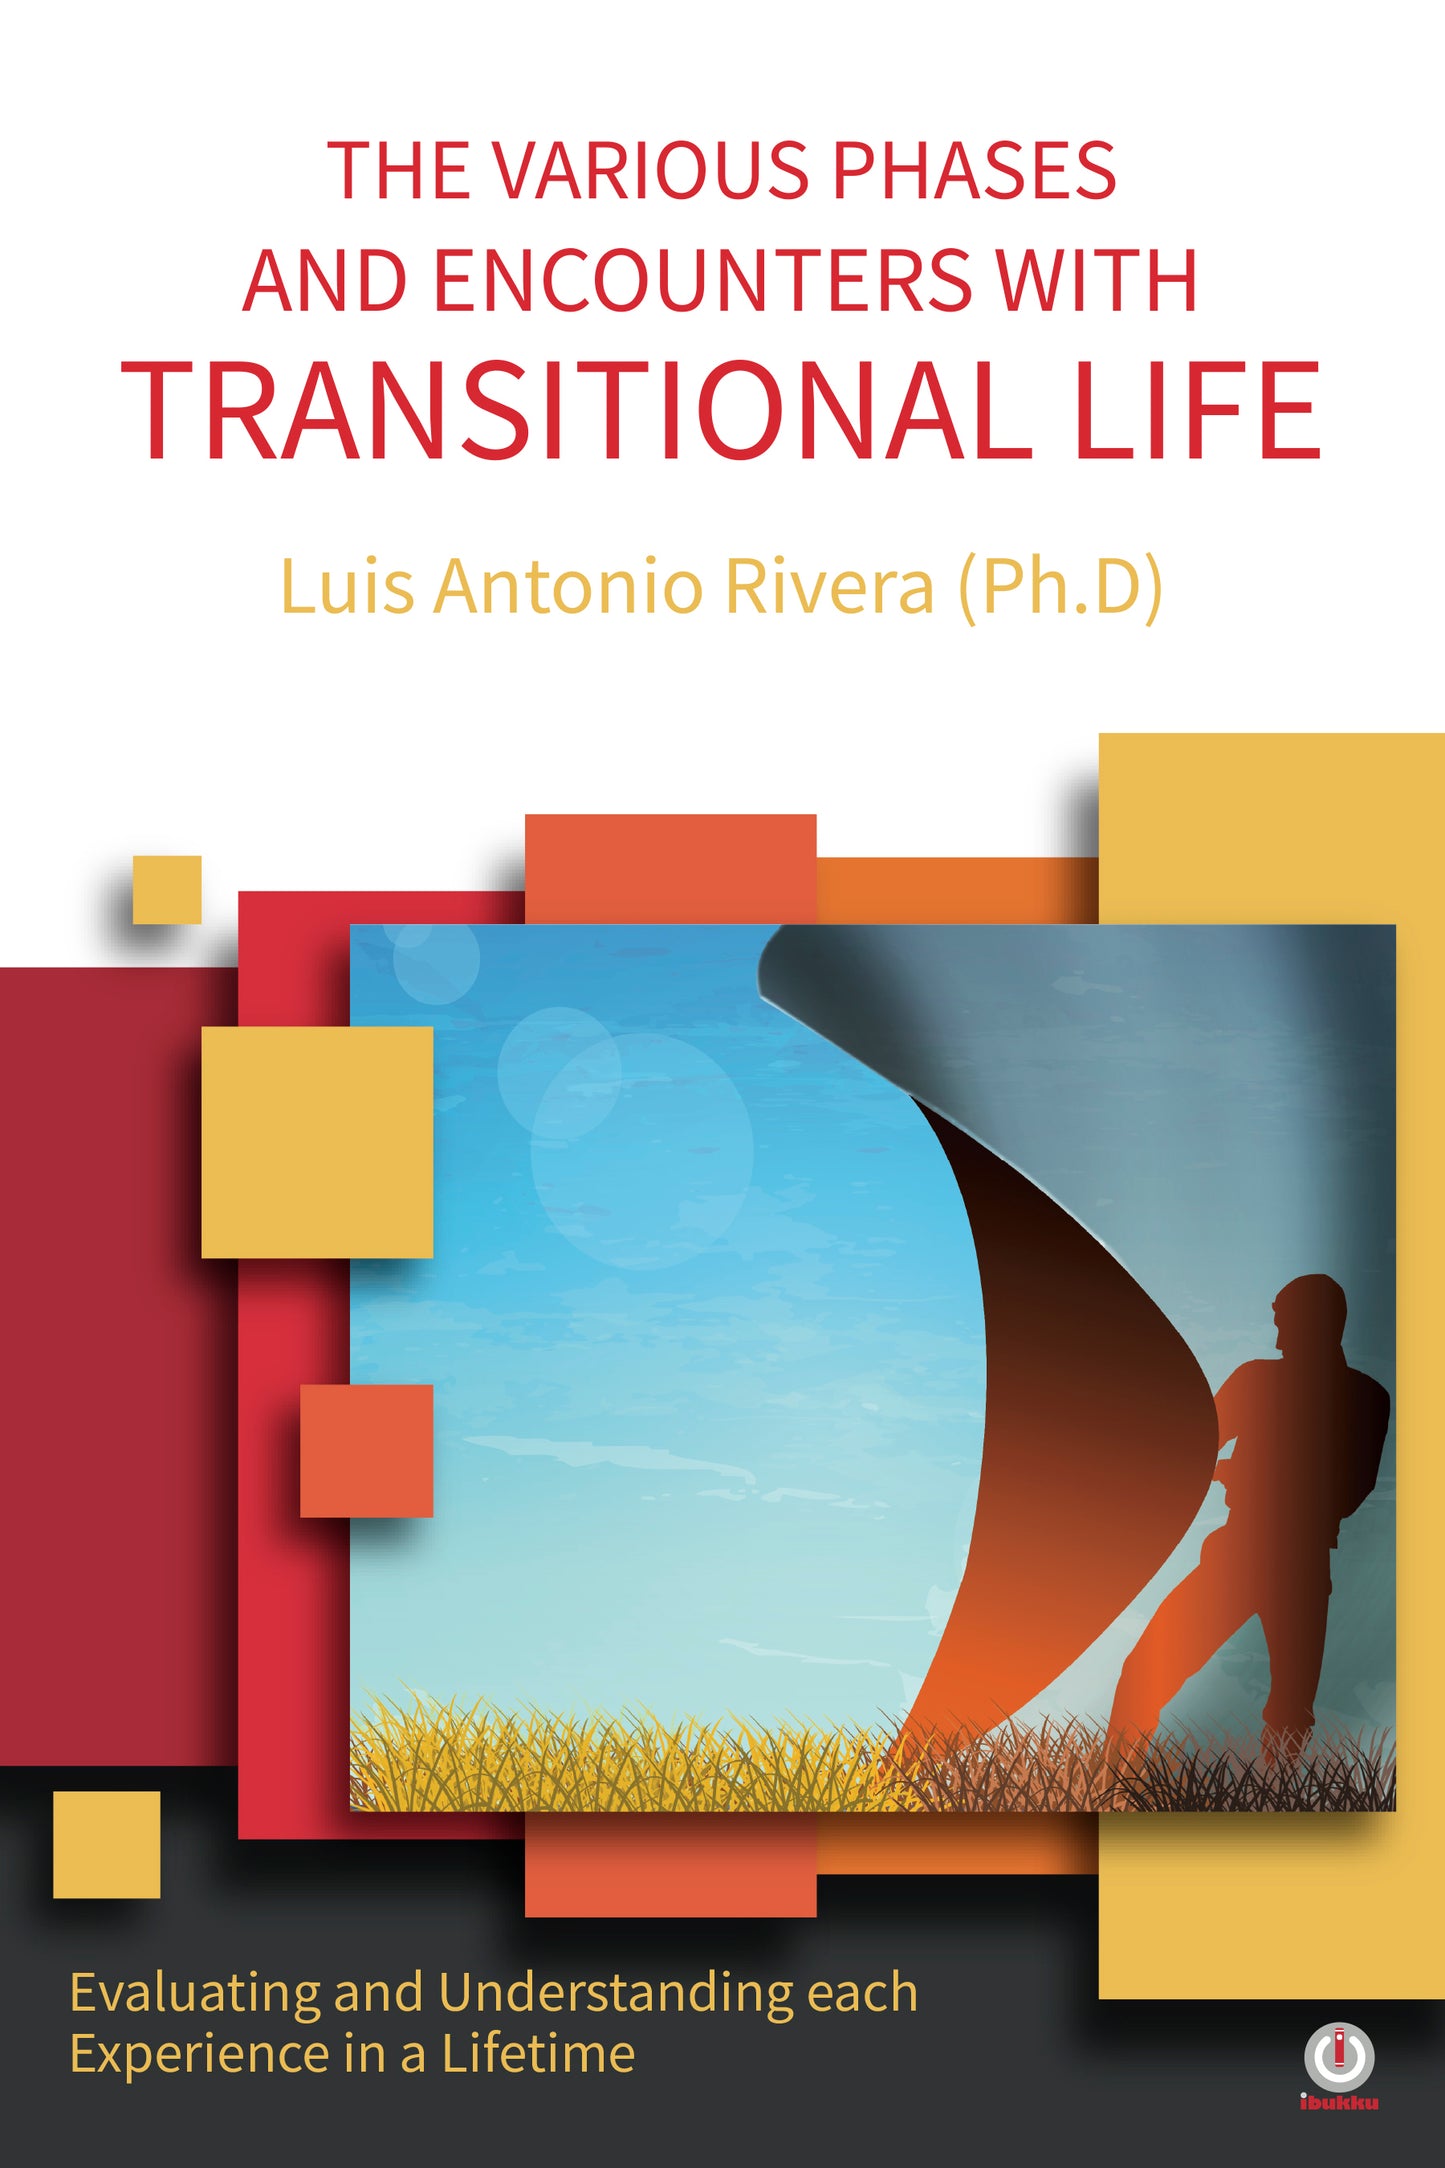 THE VARIOUS PHASES AND ENCOUNTERS WITH TRANSITIONAL LIFE: Evaluating and Understanding each Experience in a Lifetime